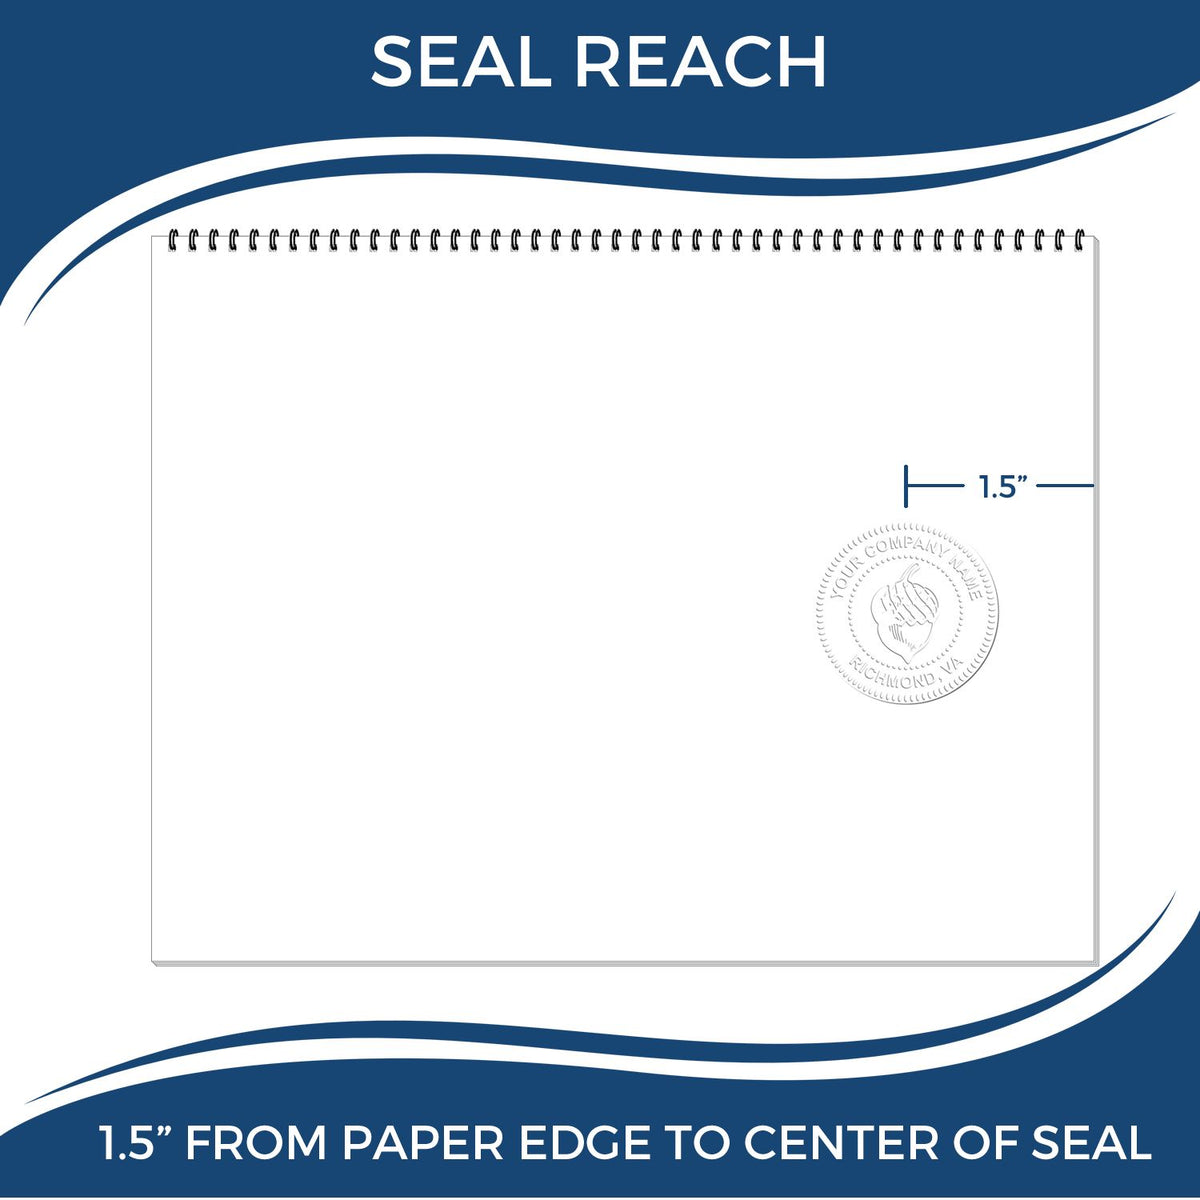 An infographic showing the seal reach which is represented by a ruler and a miniature seal image of the Handheld South Dakota Professional Engineer Embosser